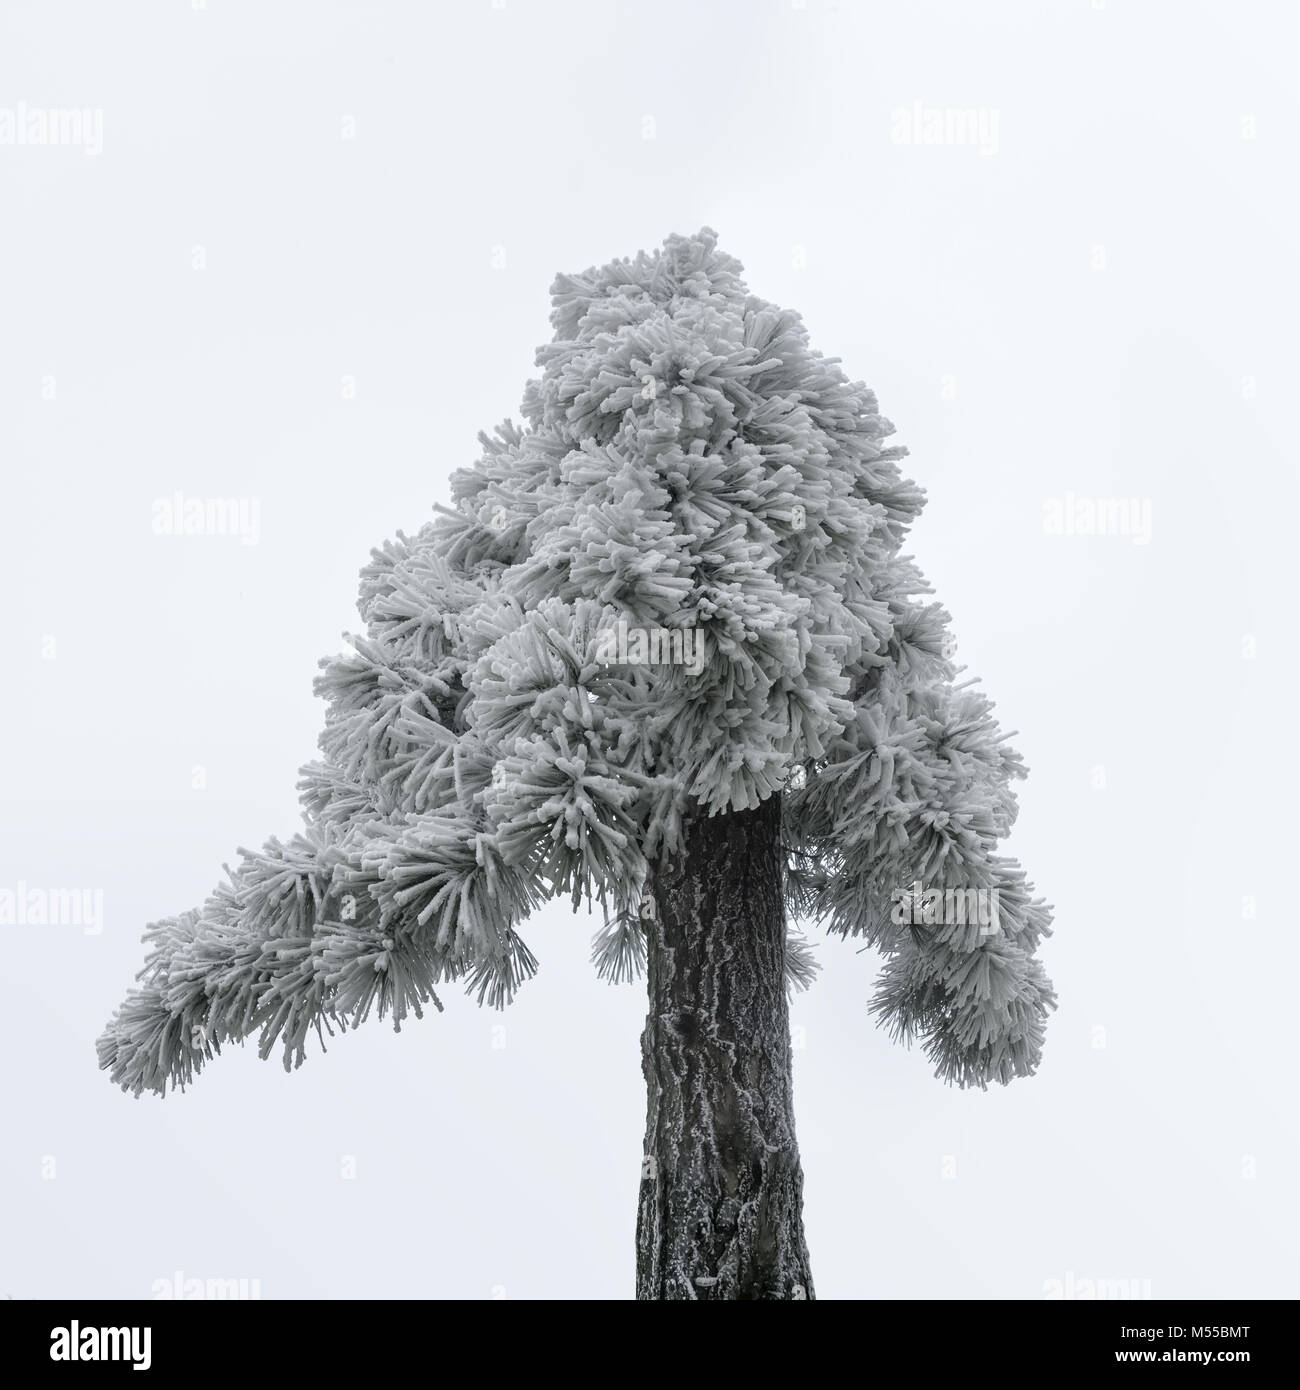 old pine tree in winter Stock Photo